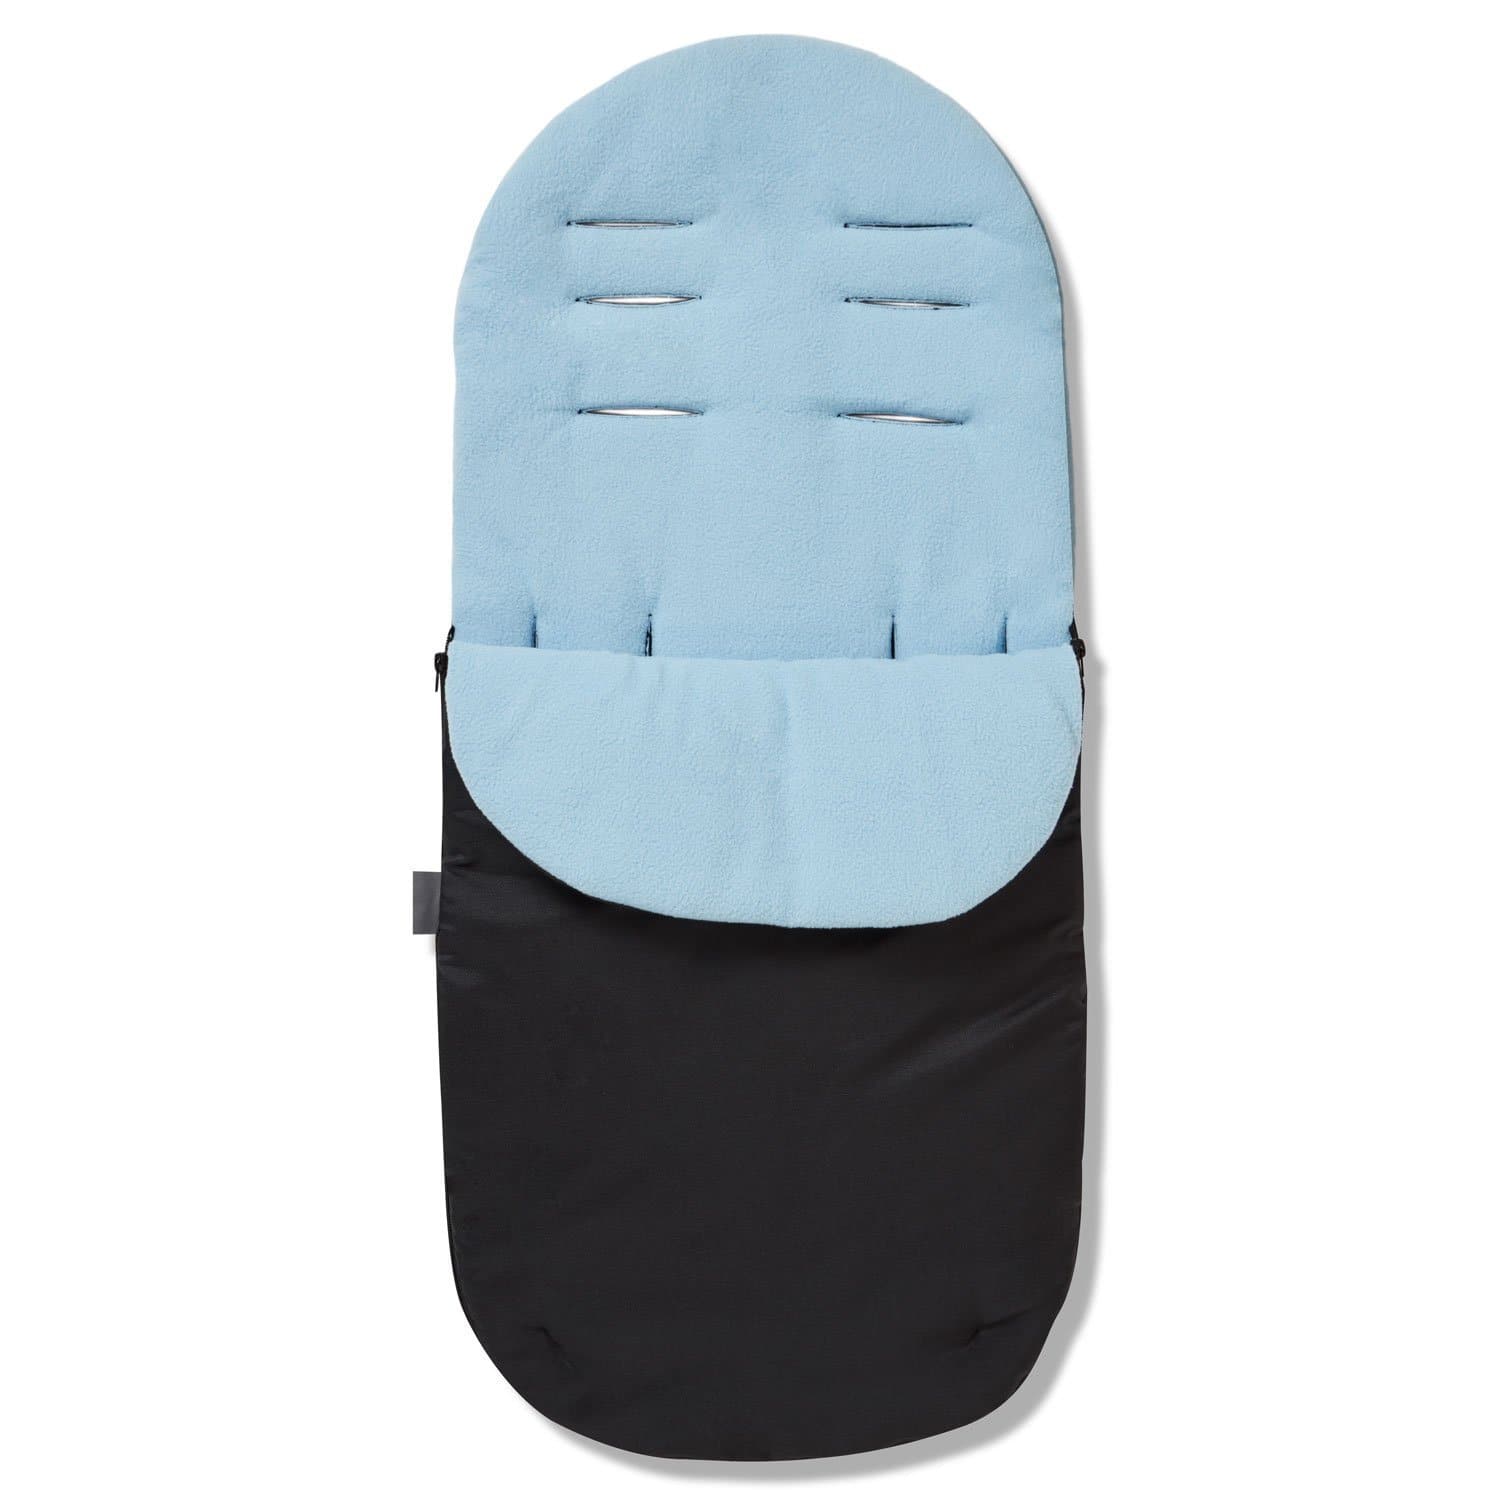 Footmuff / Cosy Toes Compatible with Bumbleride - Light Blue / Fits All Models | For Your Little One